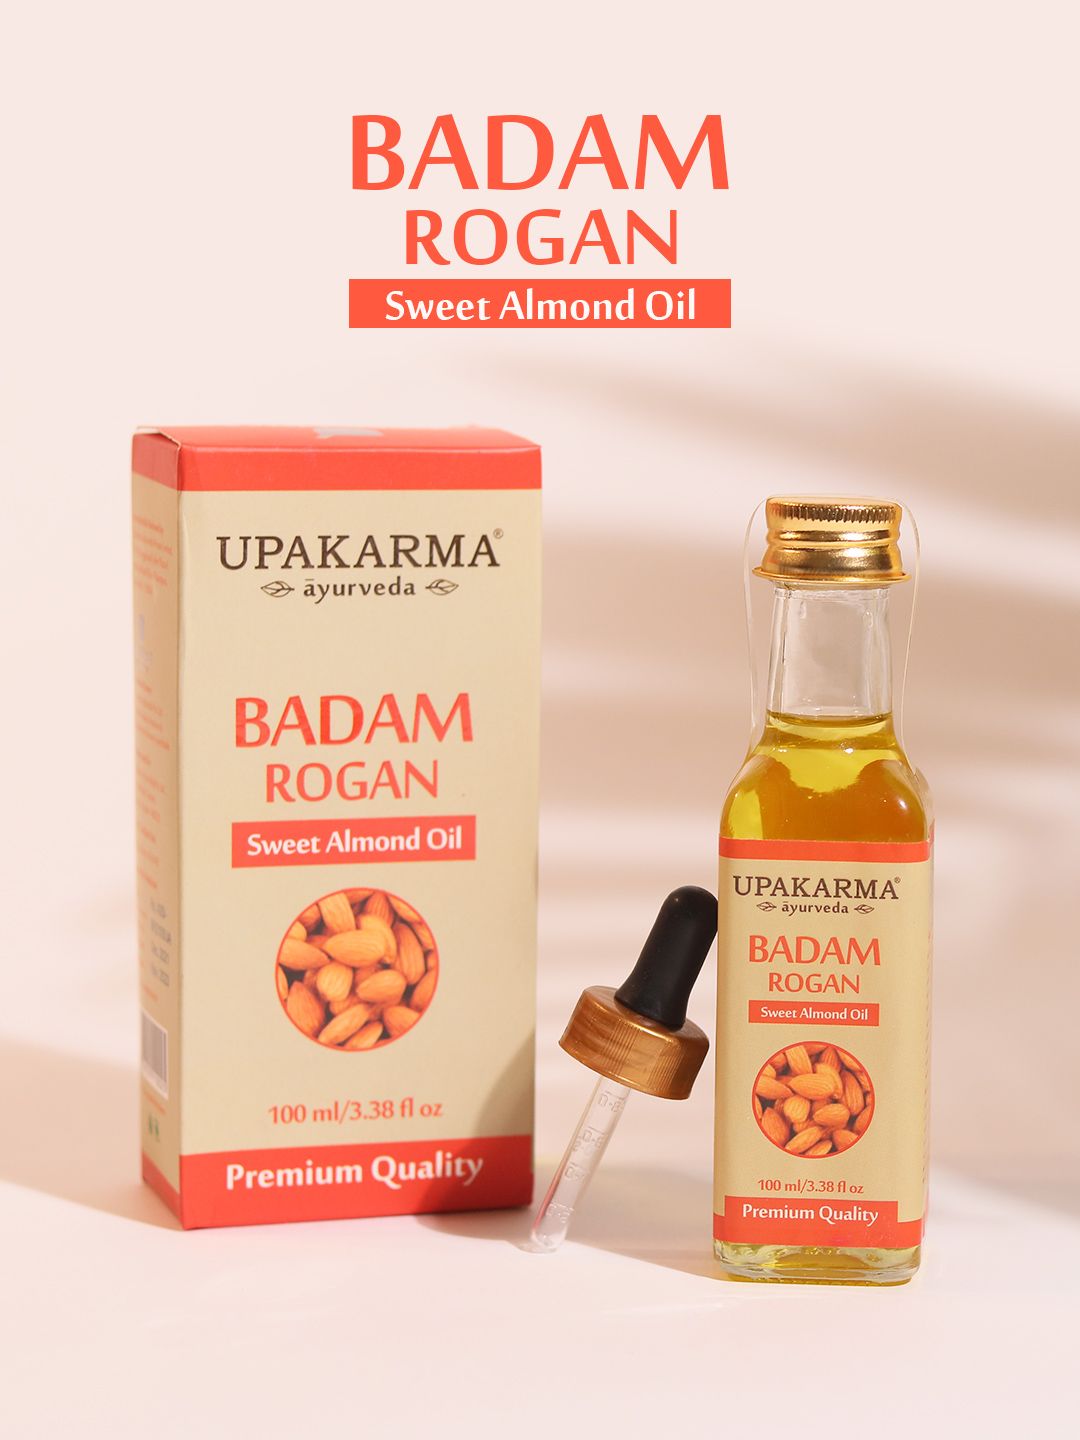 UPAKARMA Pure & Natural Cold Pressed Sweet Almond Oil Badam Rogan Oil 100ml Price in India